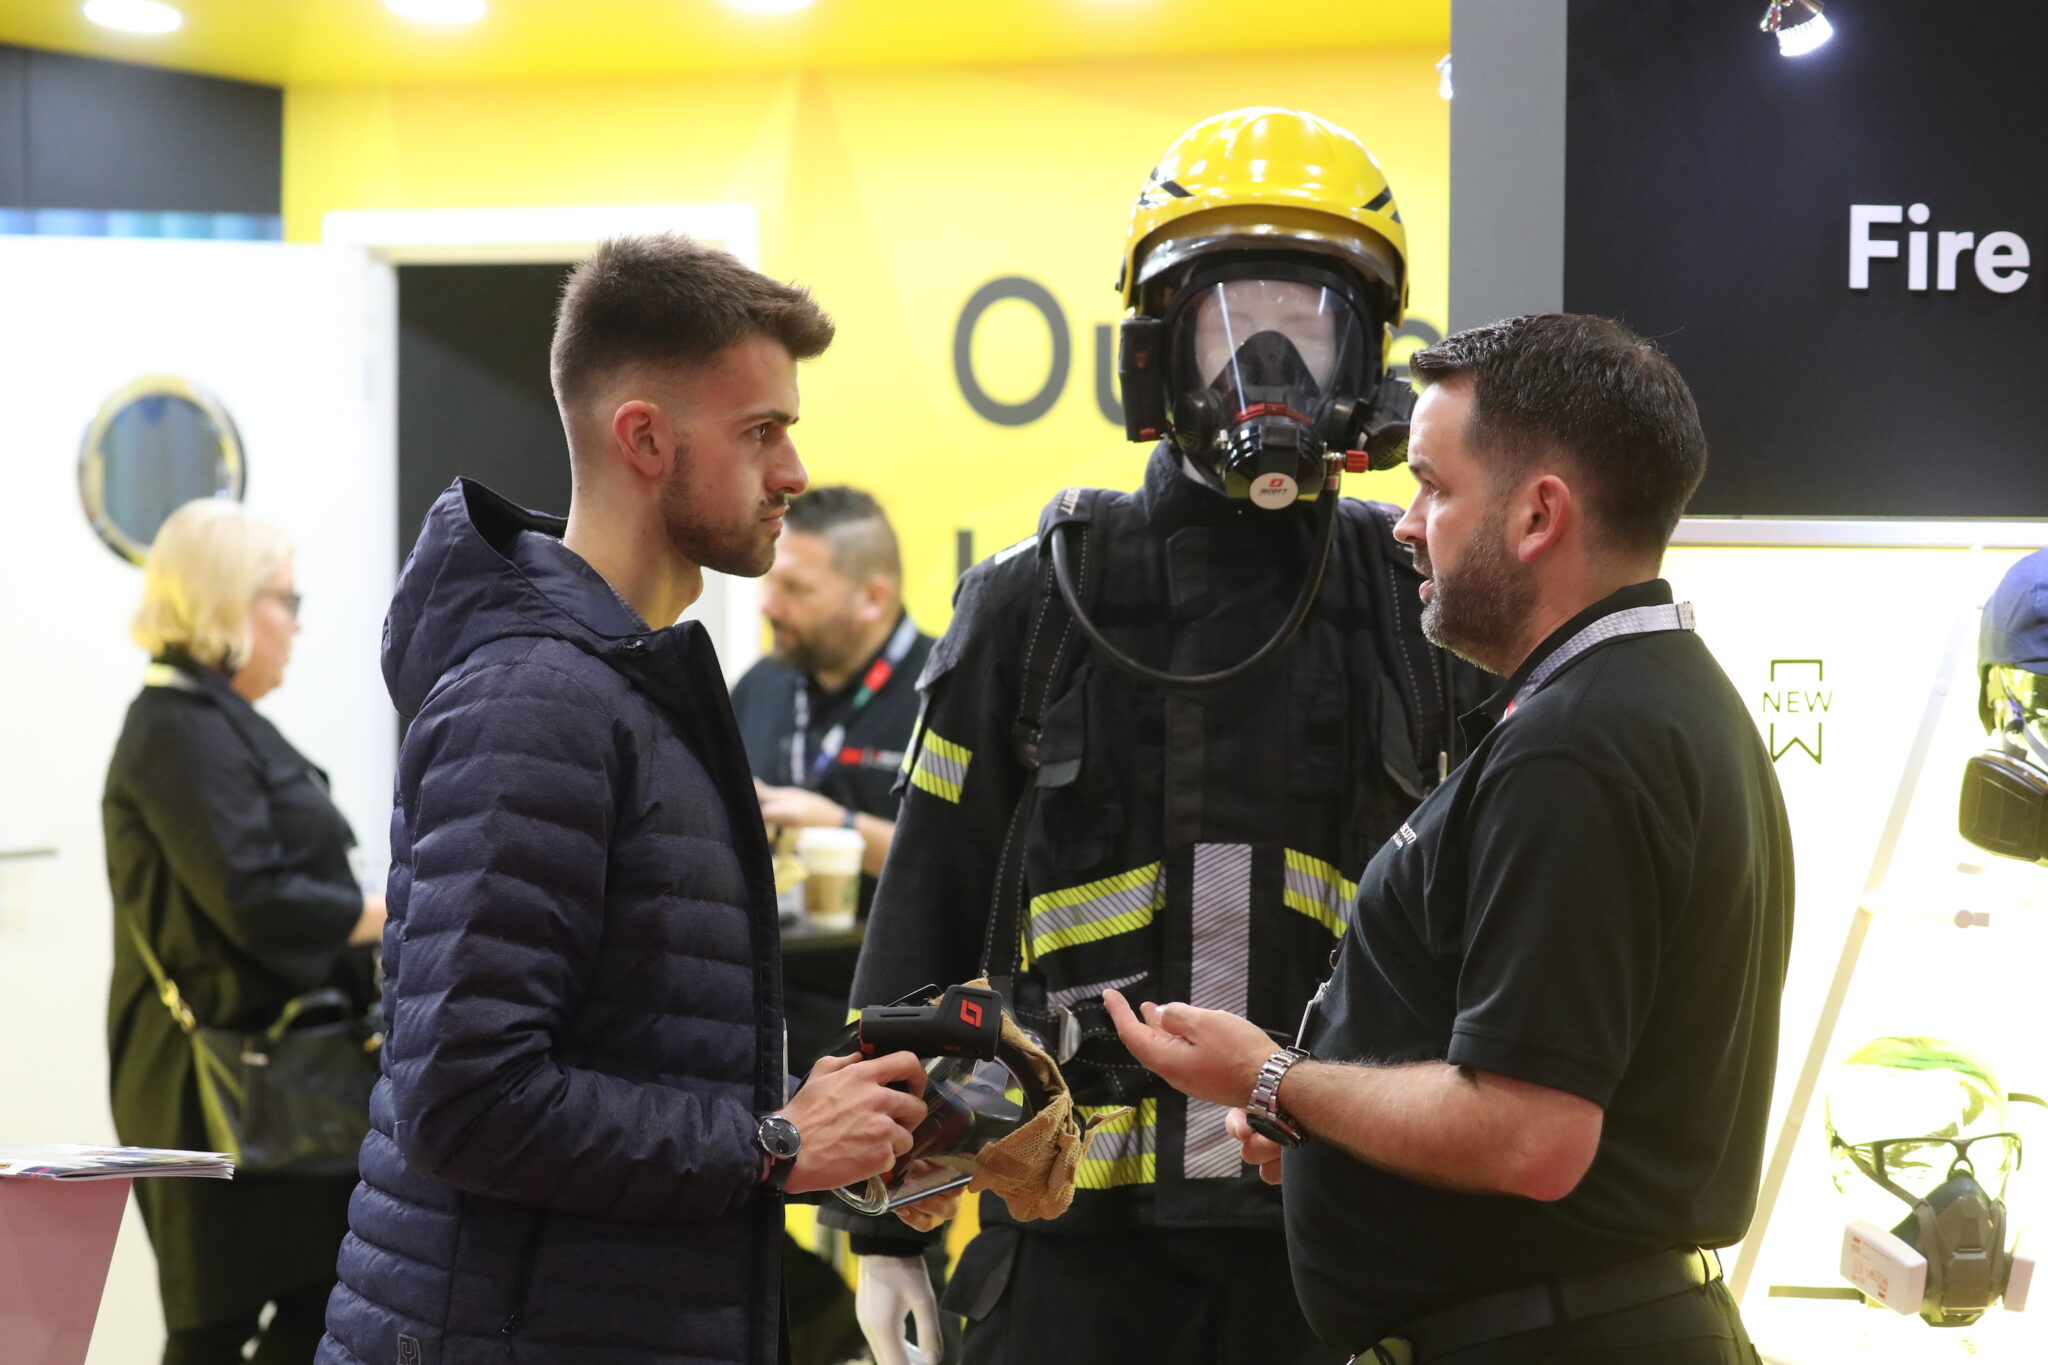 See how technology and training are transforming fire & rescue services at the Emergency Services Show